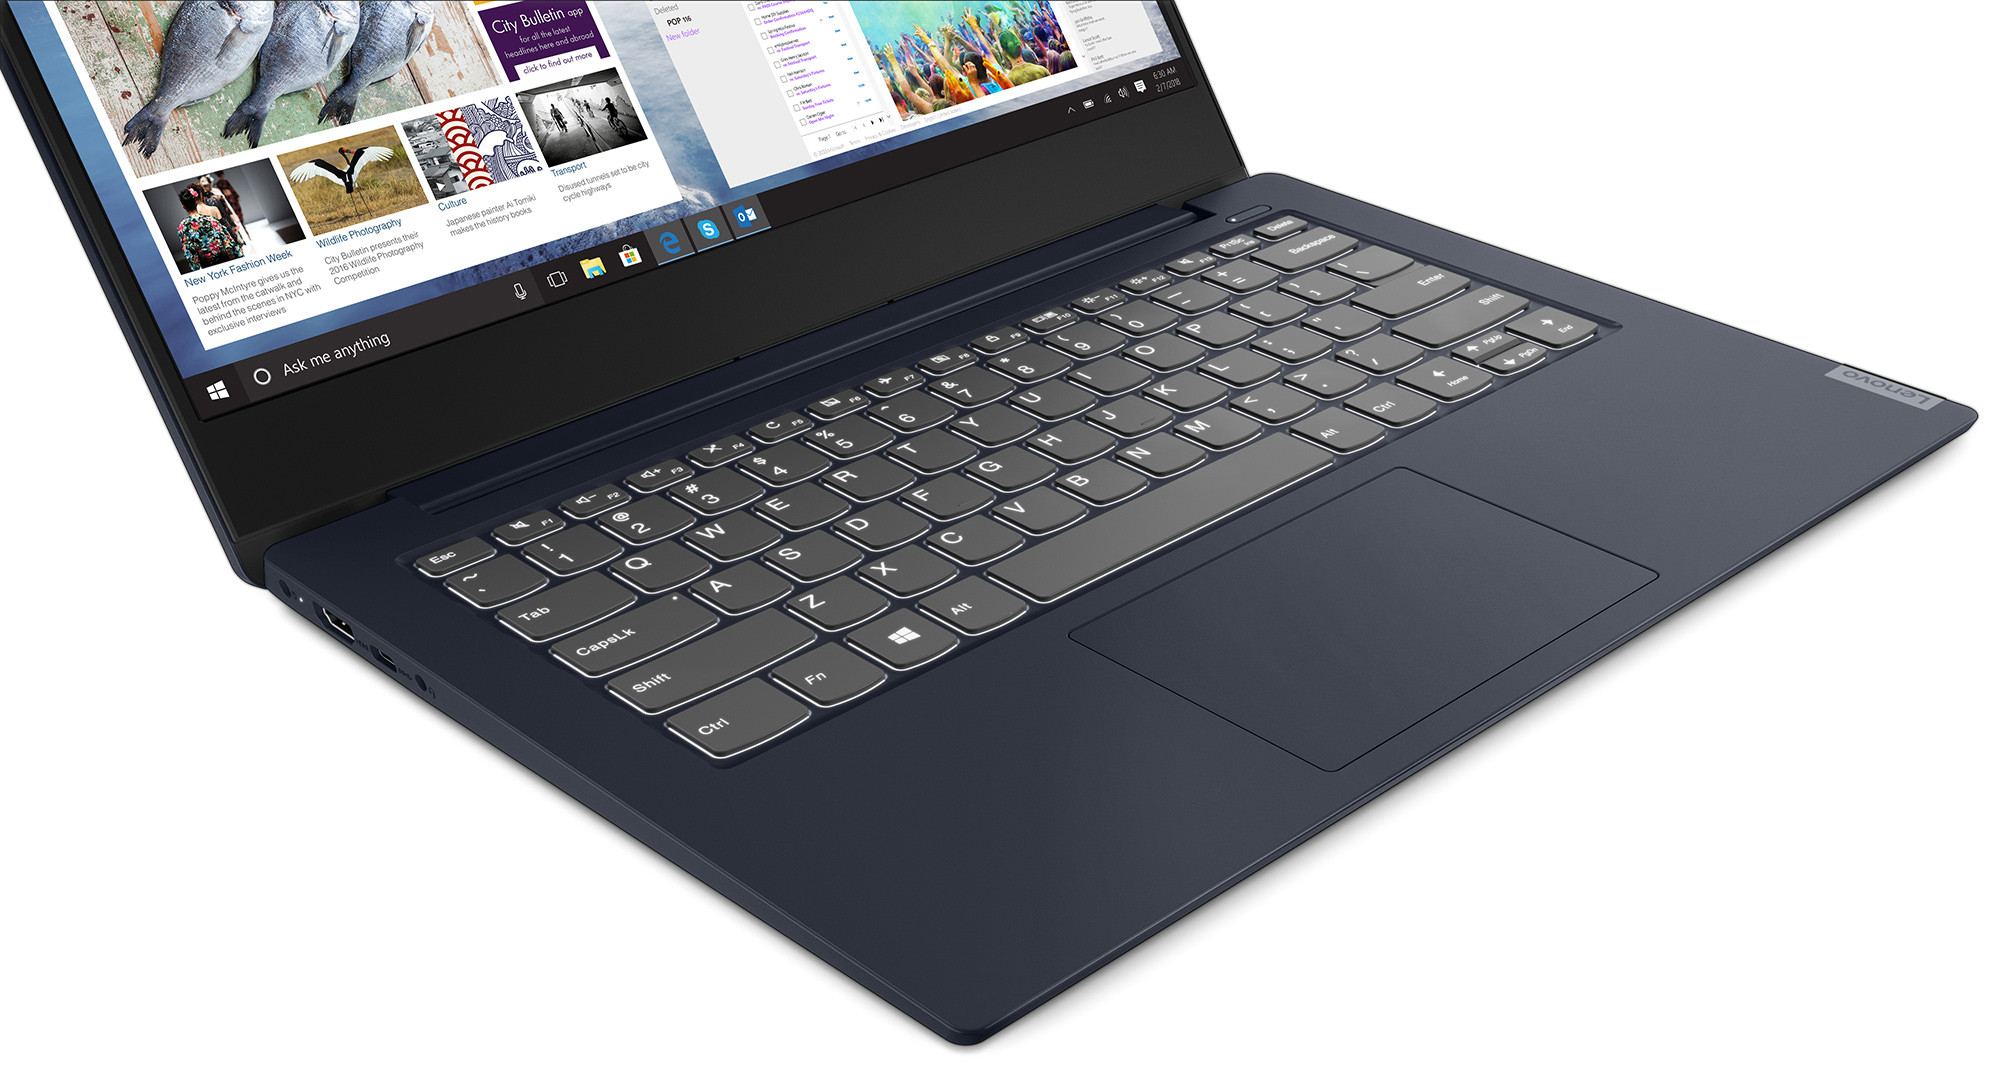 14 Lenovo Ideapad S340 Laptop With 8th Gen Intel Core I5 65u 8gb Ddr4 Memory 256gb Ssd For 3 99 Shipped Plus 53 Back In Rakuten Points And 1 Cash Back Apex Deals